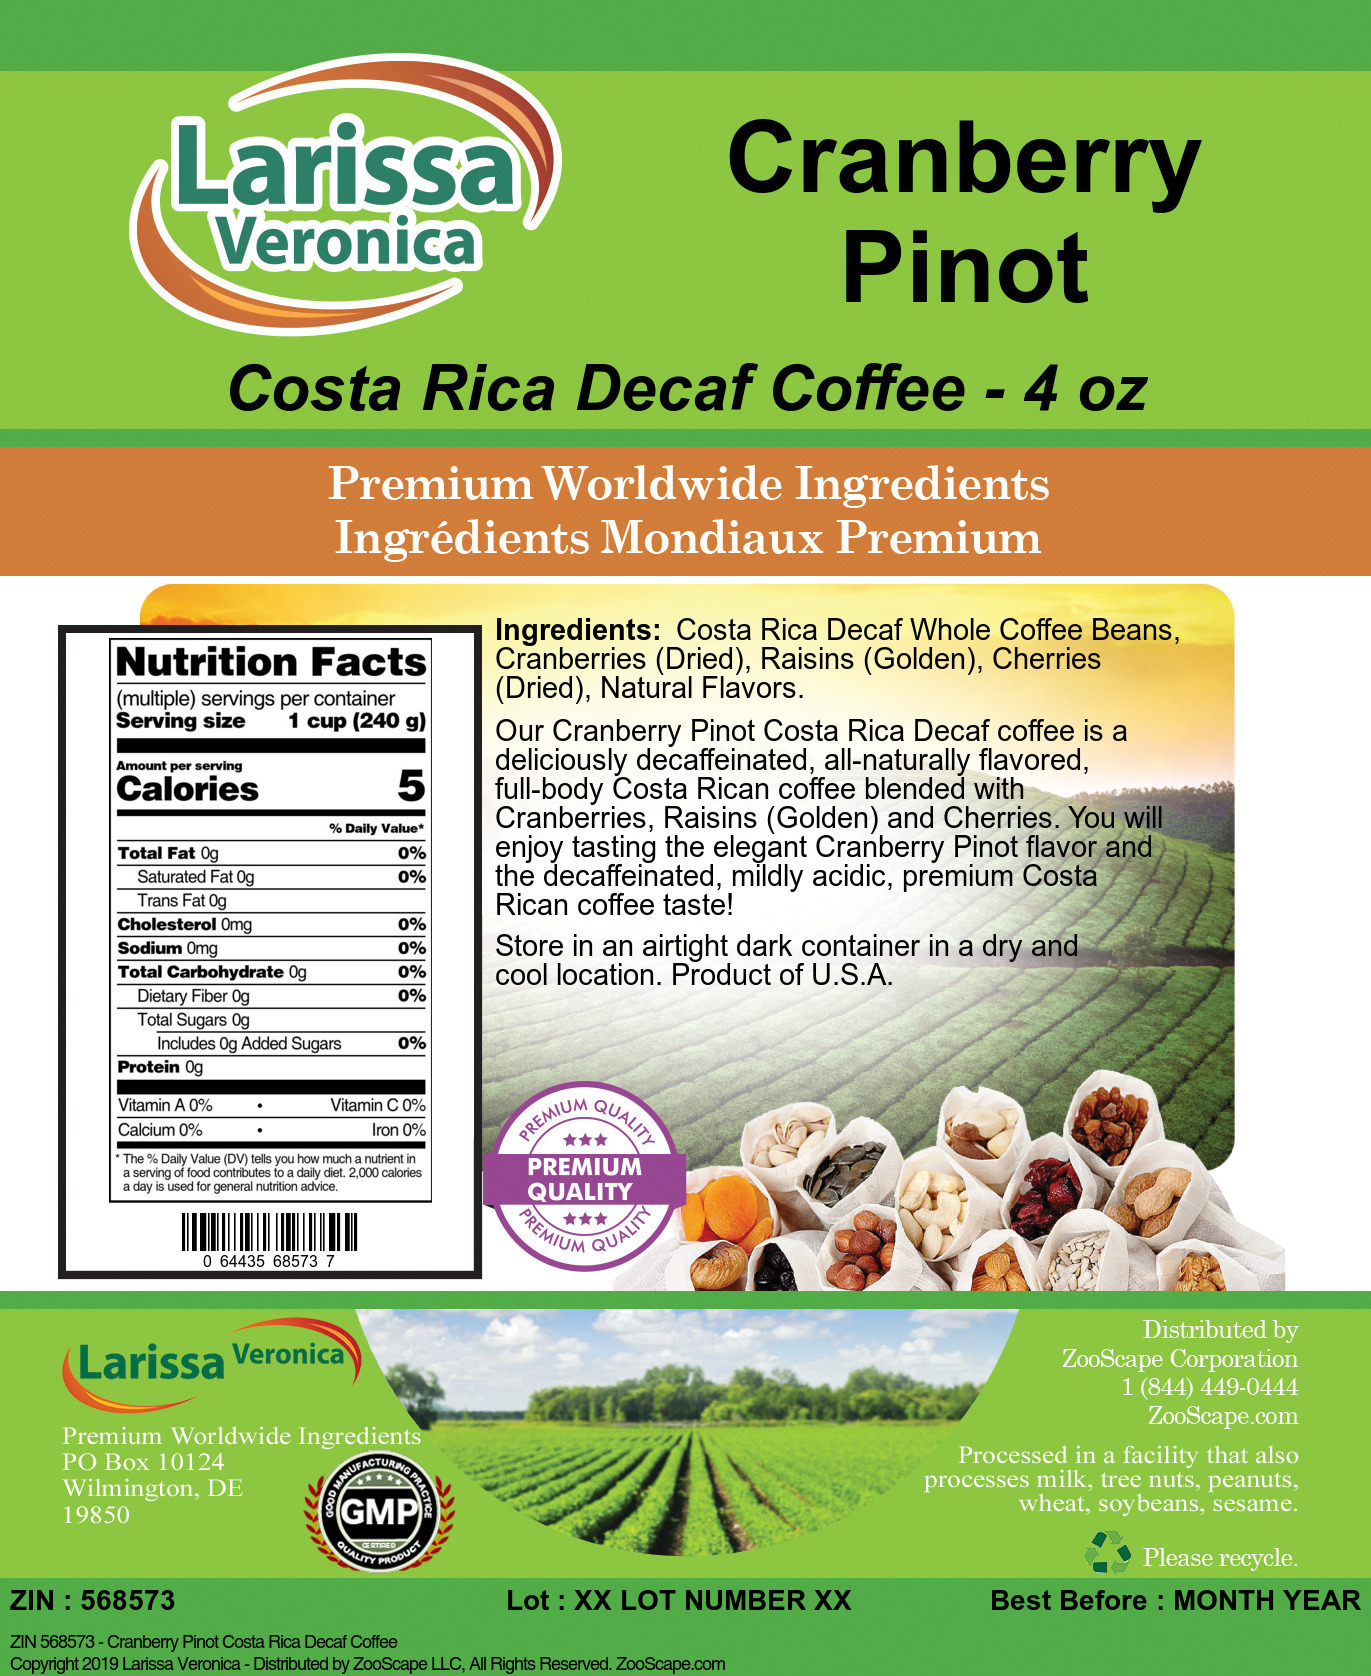 Cranberry Pinot Costa Rica Decaf Coffee - Label